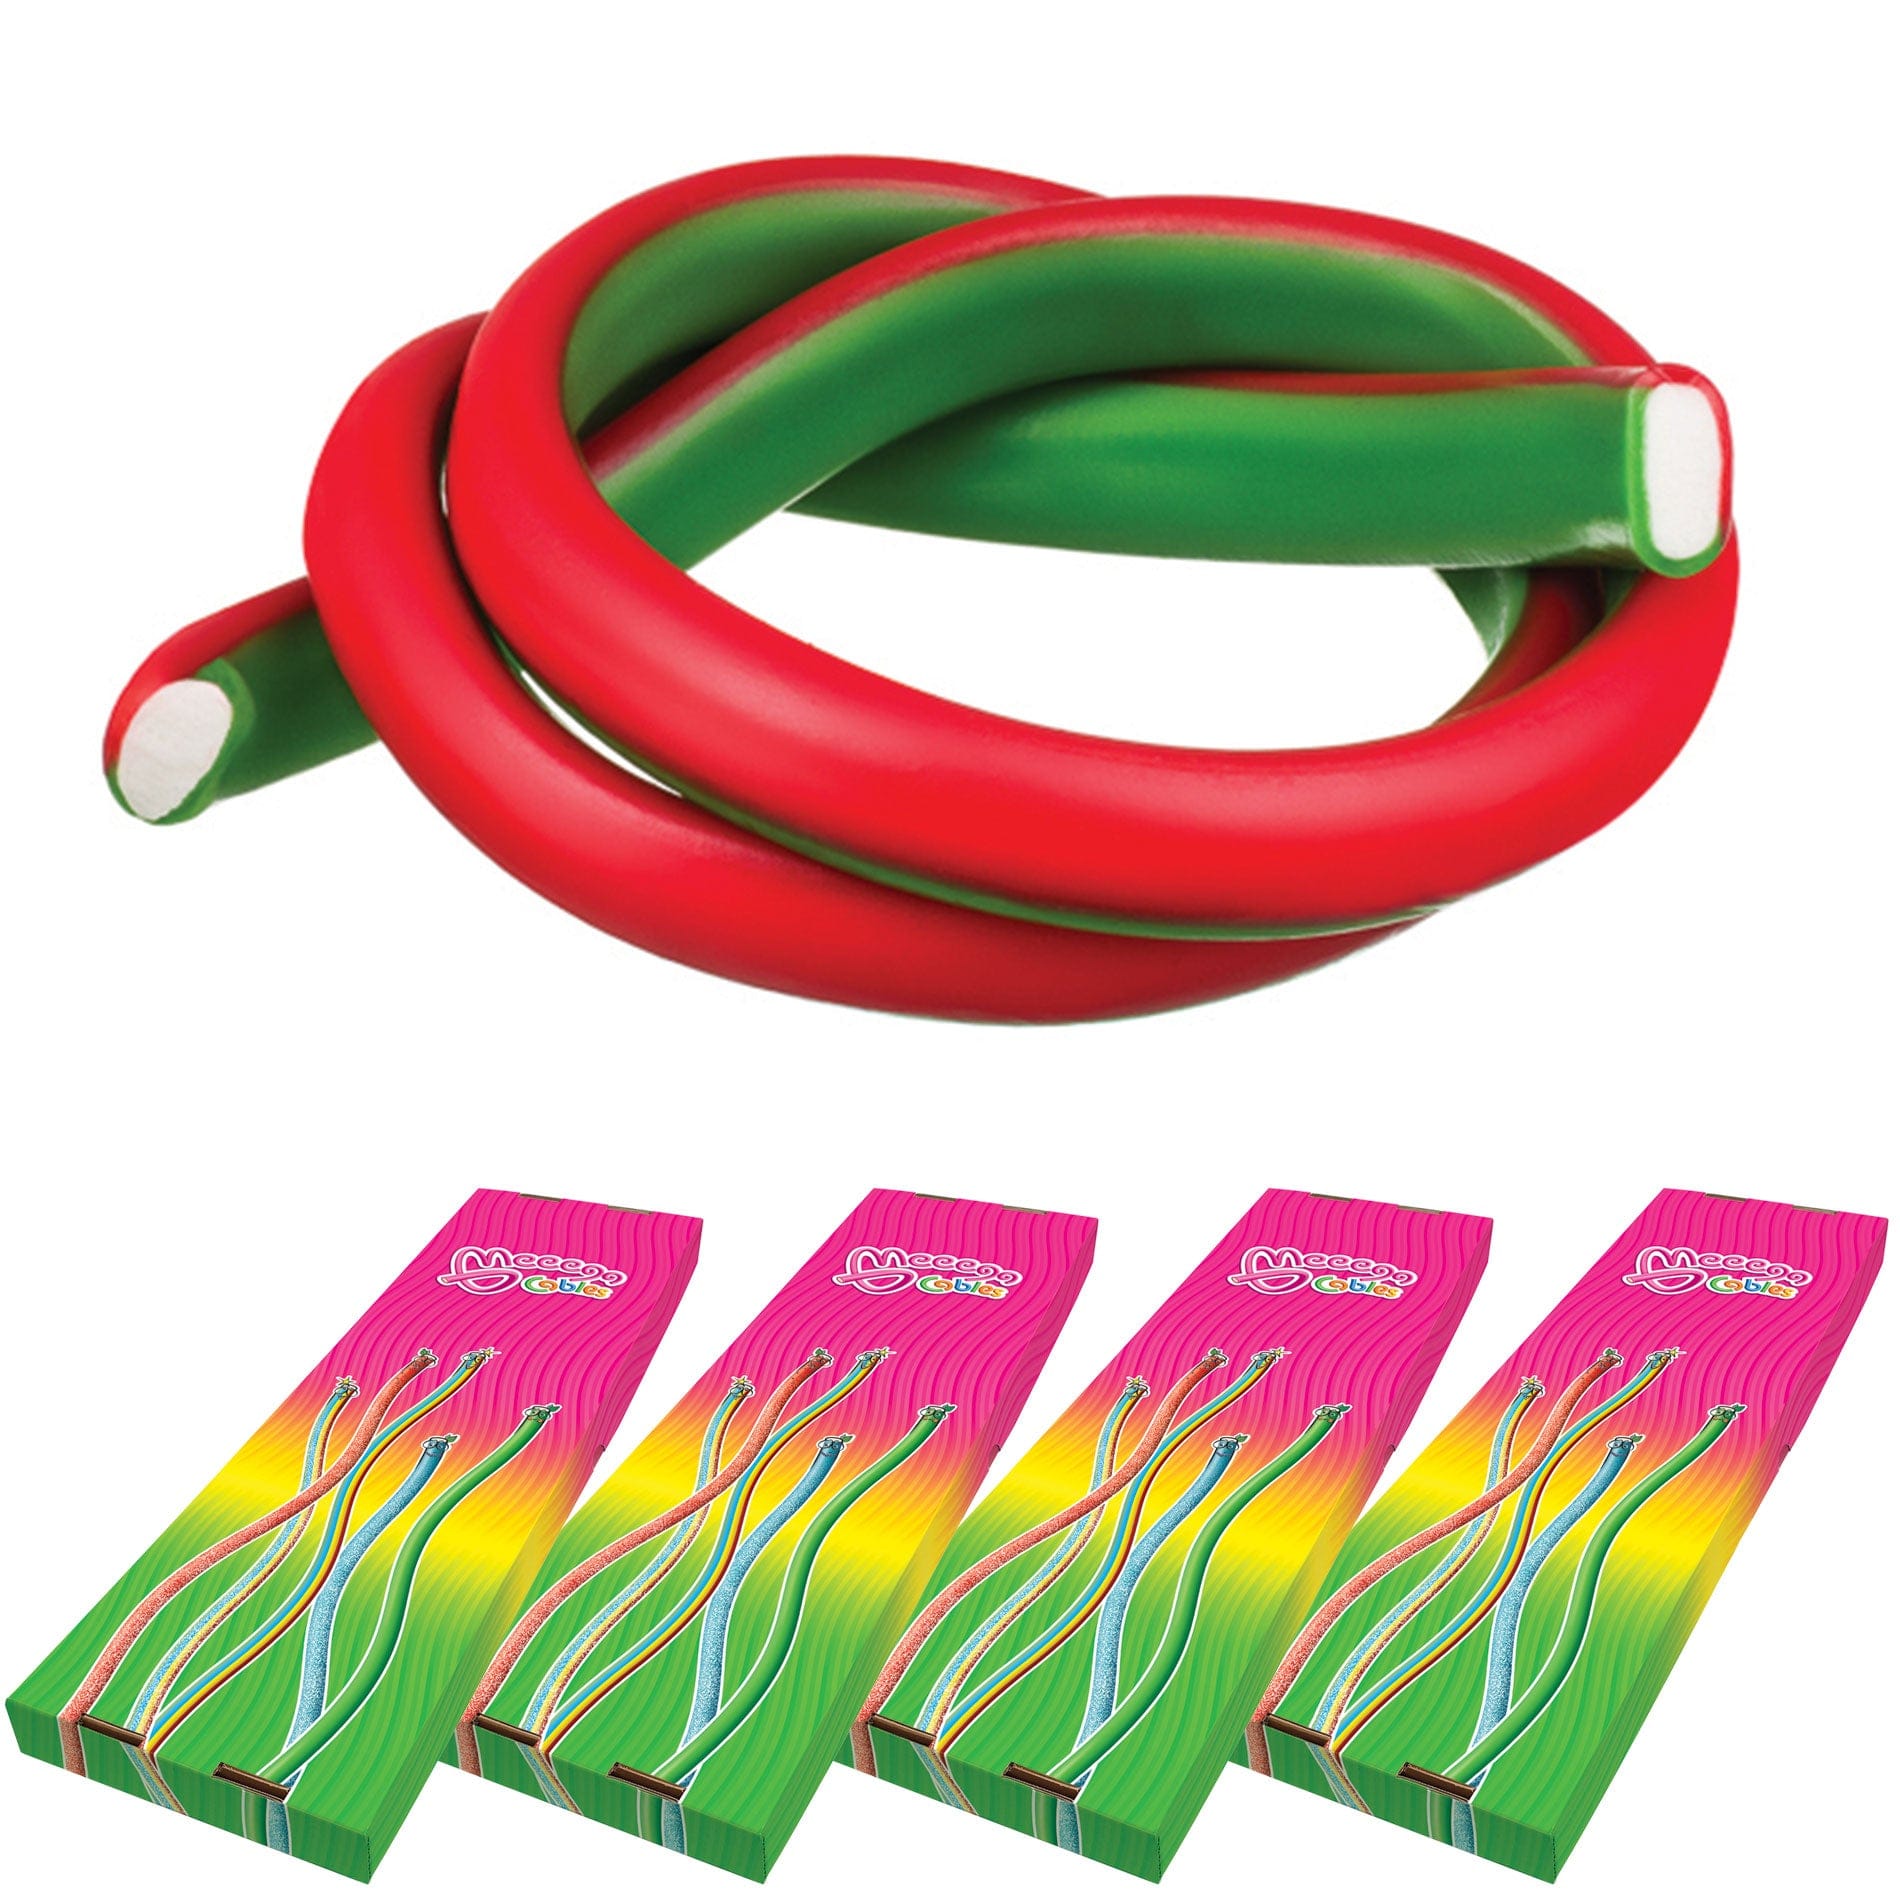 Novelty Concessions Gummy Rope WATERMELON STRAWBERRY / 4 Pack (120 pieces) Meeega Cables European Chewy Rope Candy - Box of 30 individually wrapped Meeega Cables, each over 2-feet long cups with lids and straws